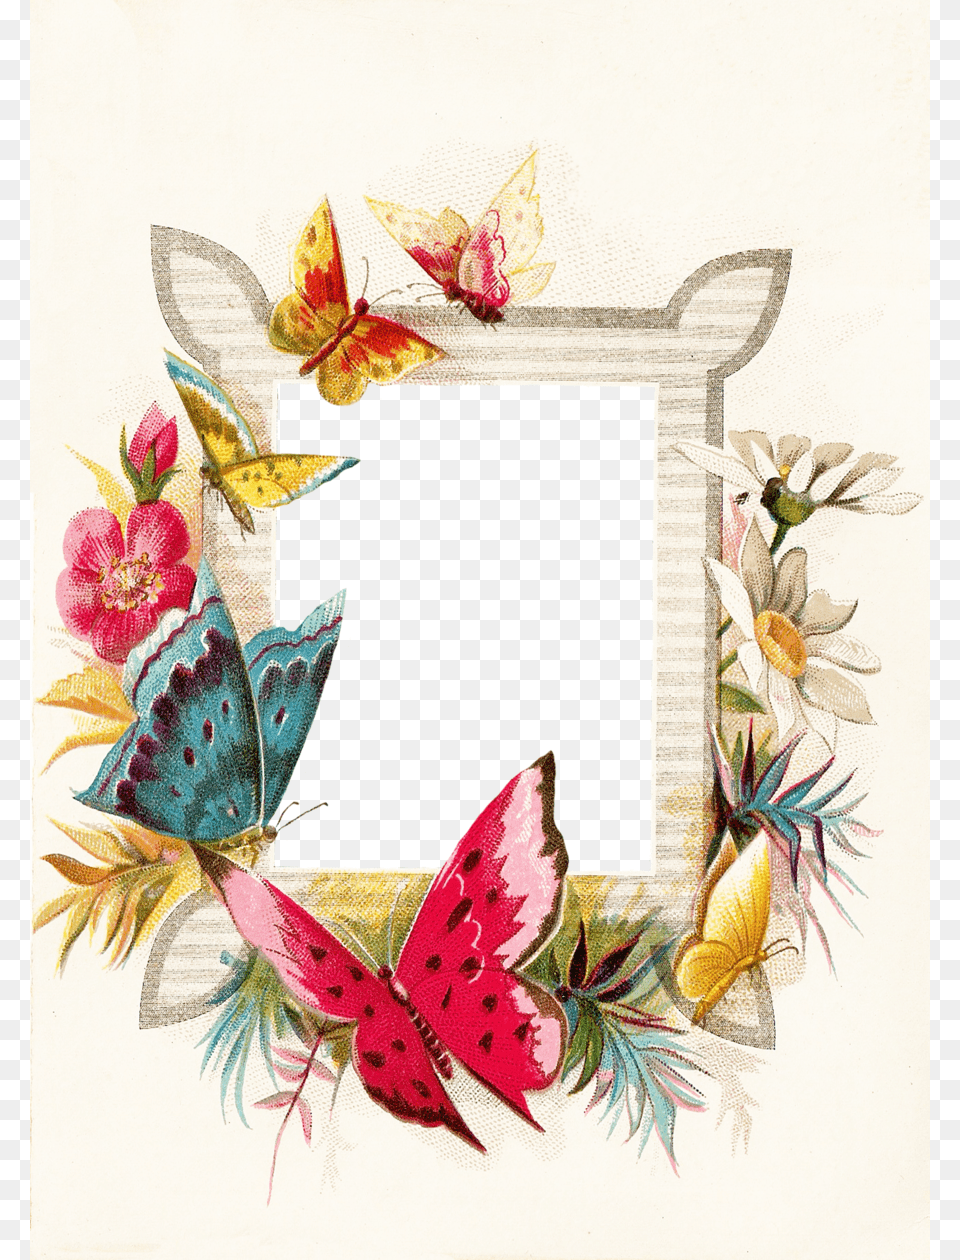 Butterfly Borders And Frames Clipart Butterfly Feather Border And Frames, Greeting Card, Envelope, Mail, Pattern Png Image